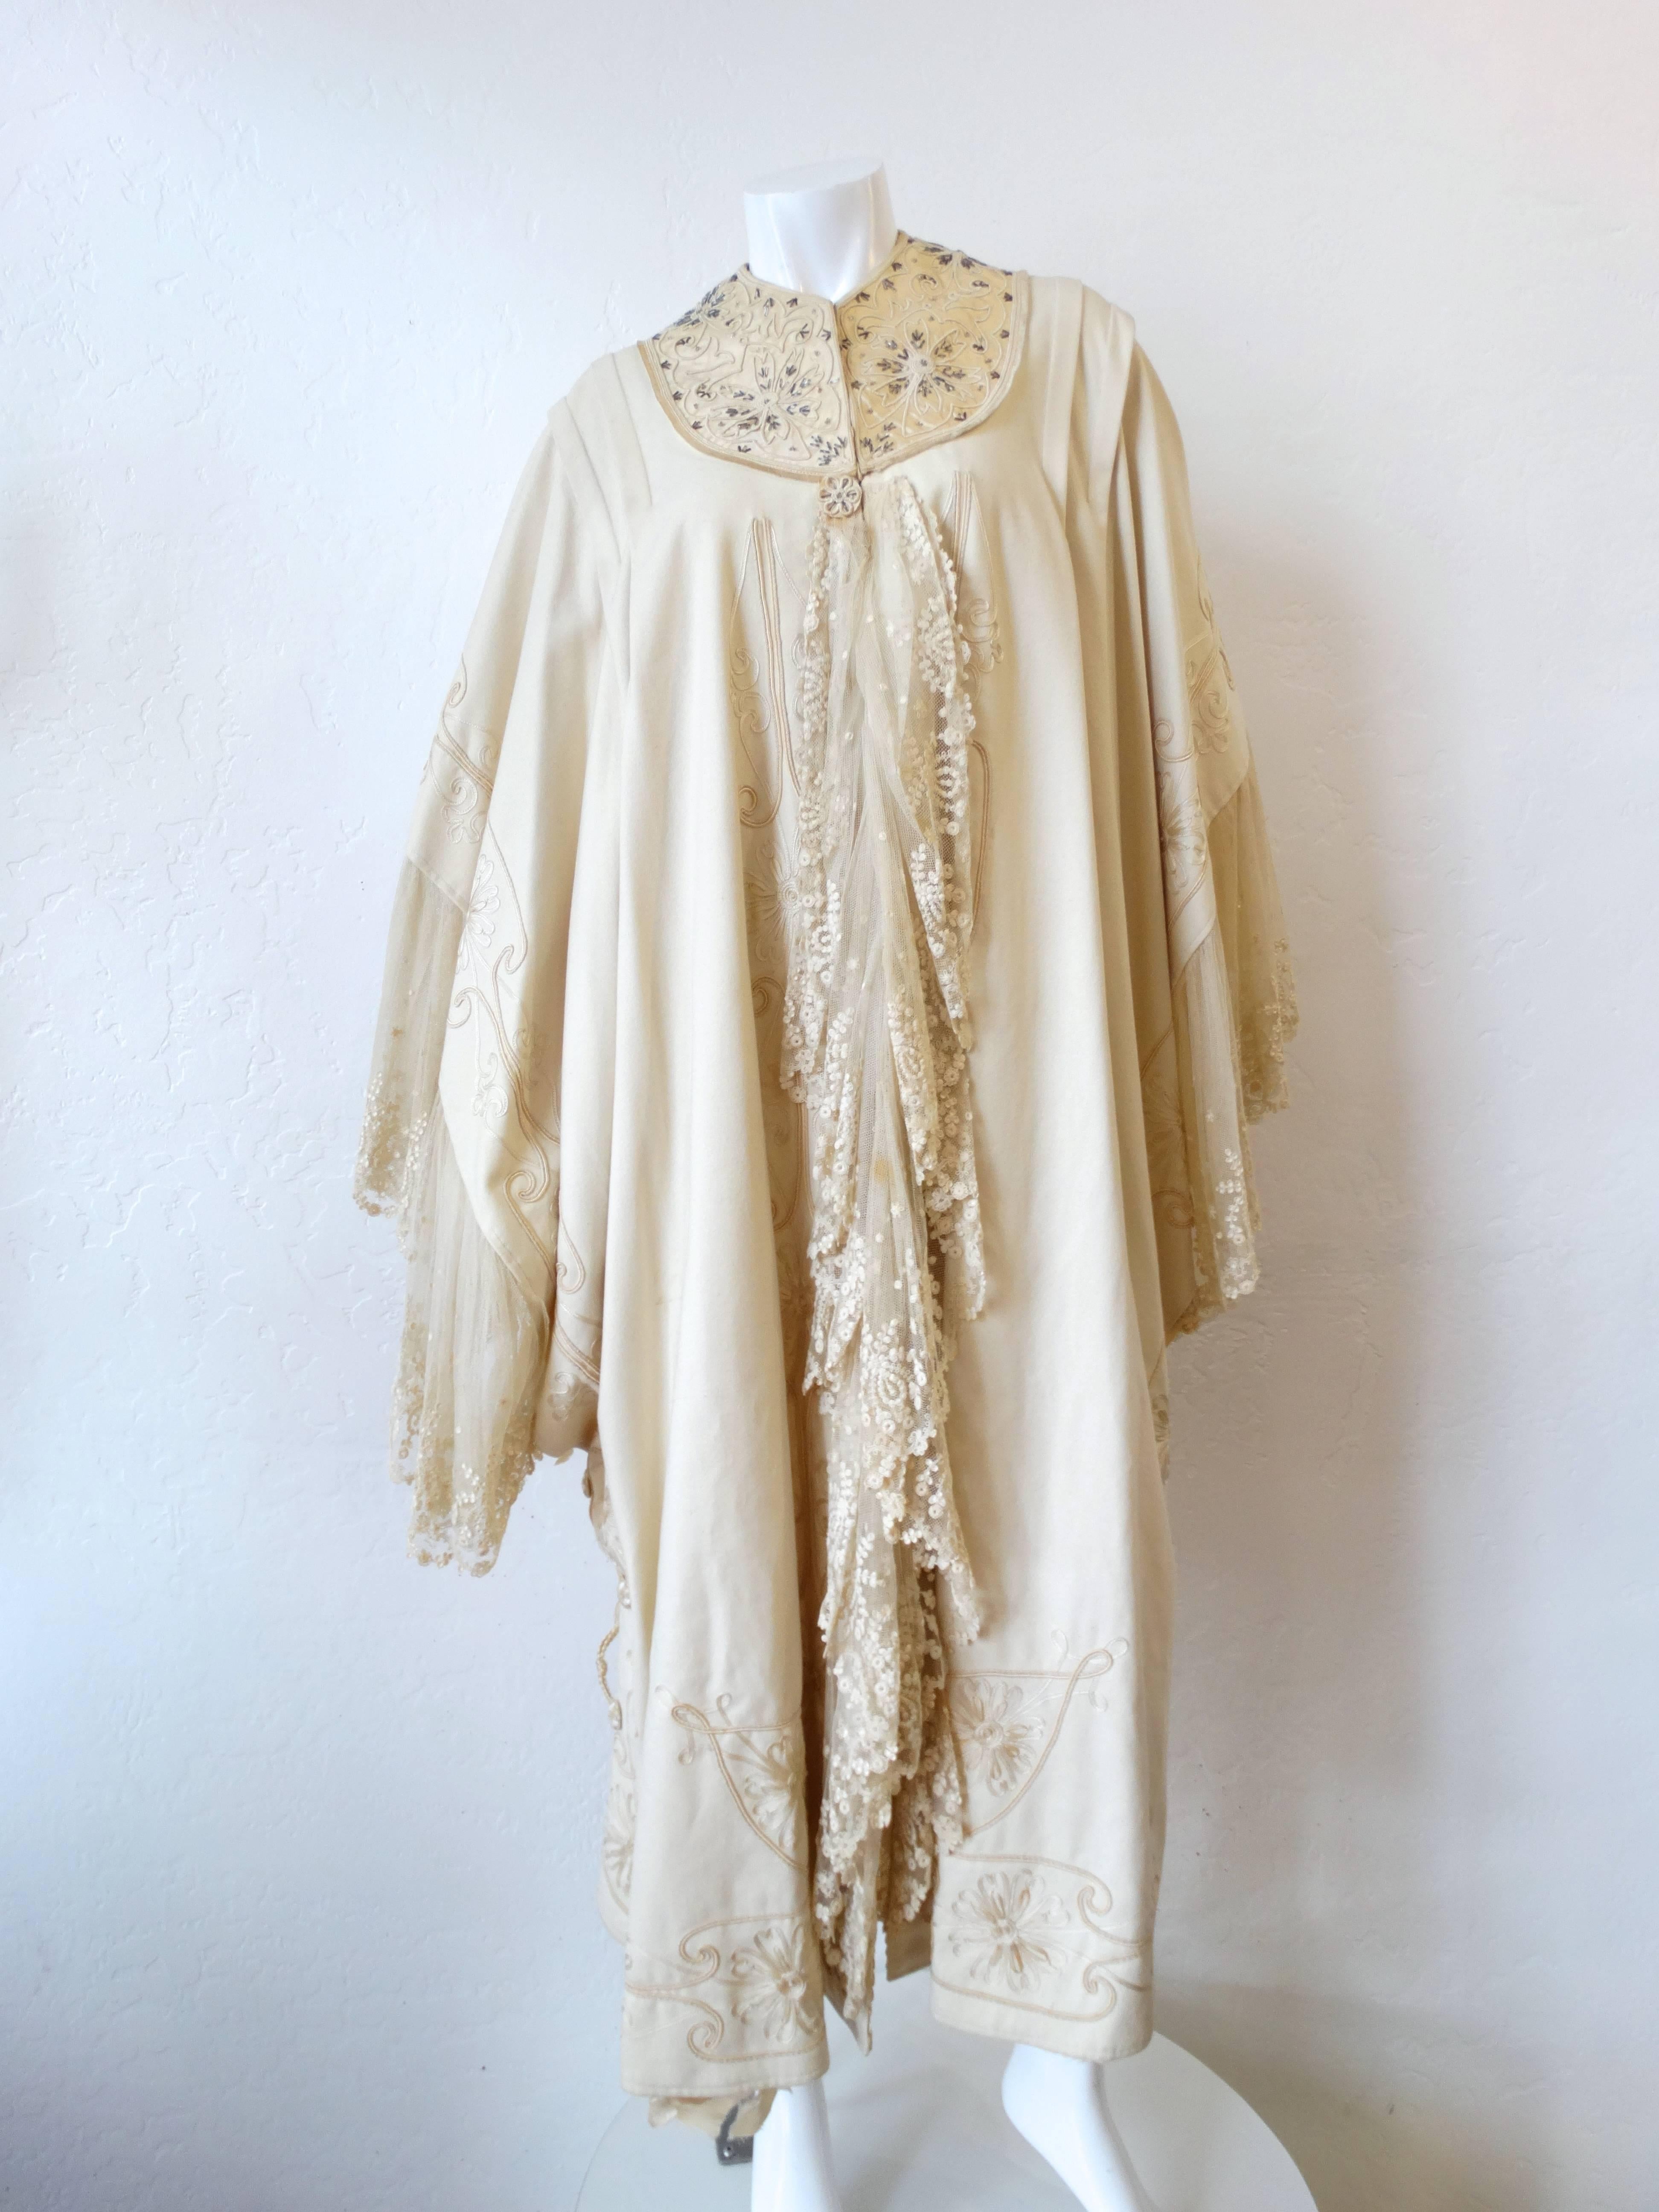 Incredible 1930s Museum Quality cape! Huge angel wing sleeves lined with layers of intricate cream lace. Cream silk yoke around the neck features detailed botanical embroidery and silver beaded accents. Hook and eye closures up the front of the